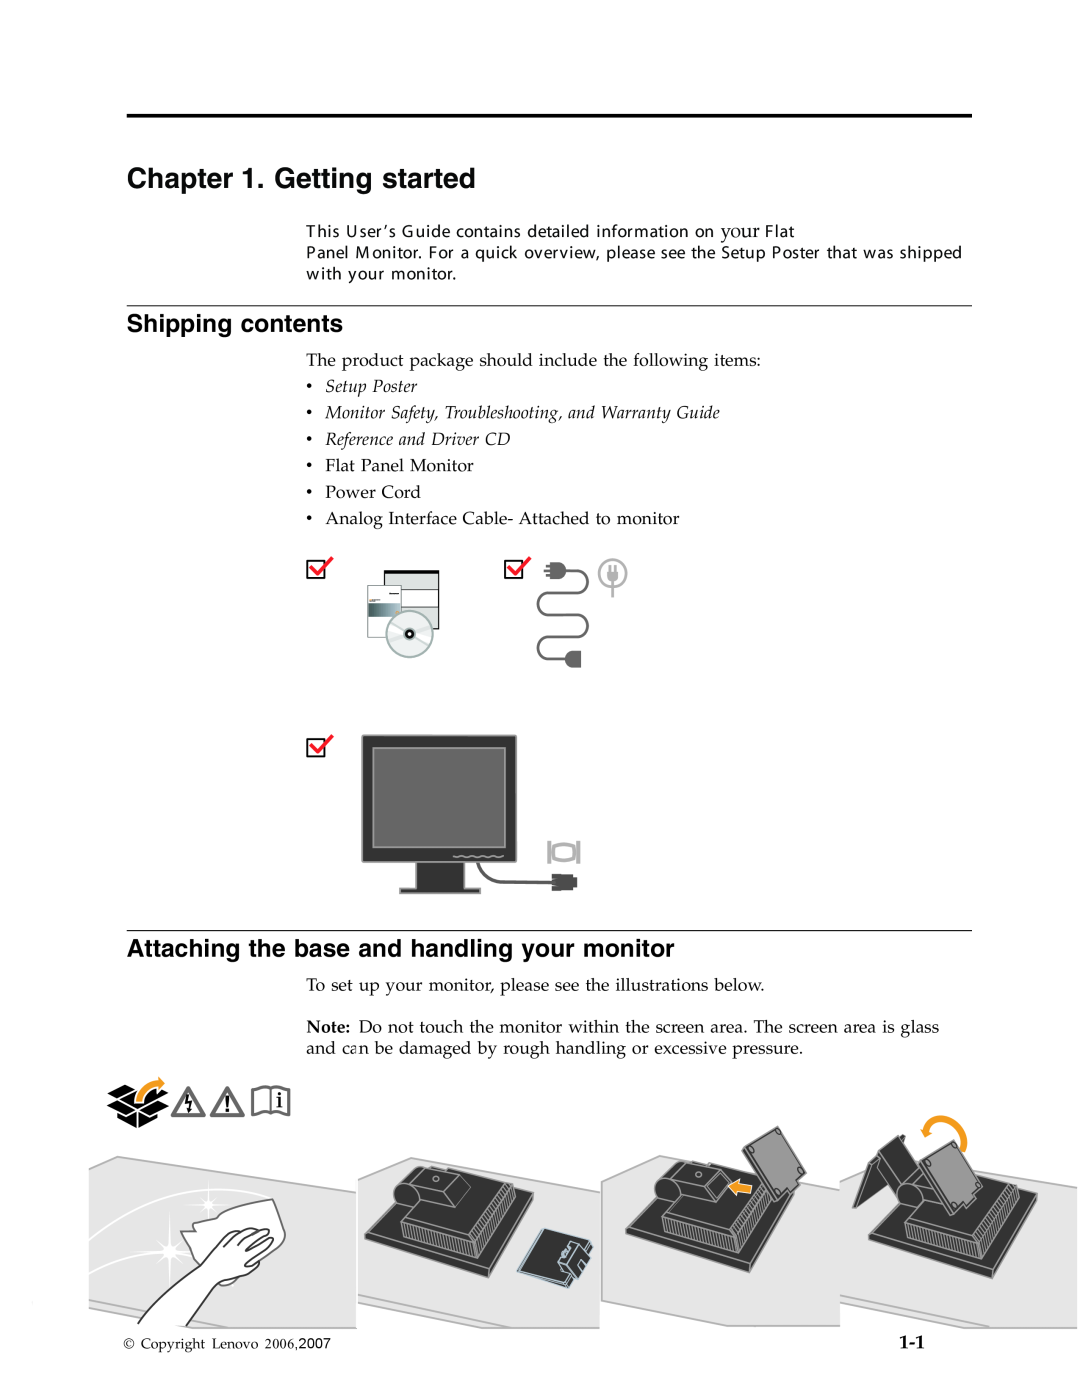 Lenovo L171 manual Getting started, Shipping contents, Attaching the base and handling your monitor, vSetup Poster 